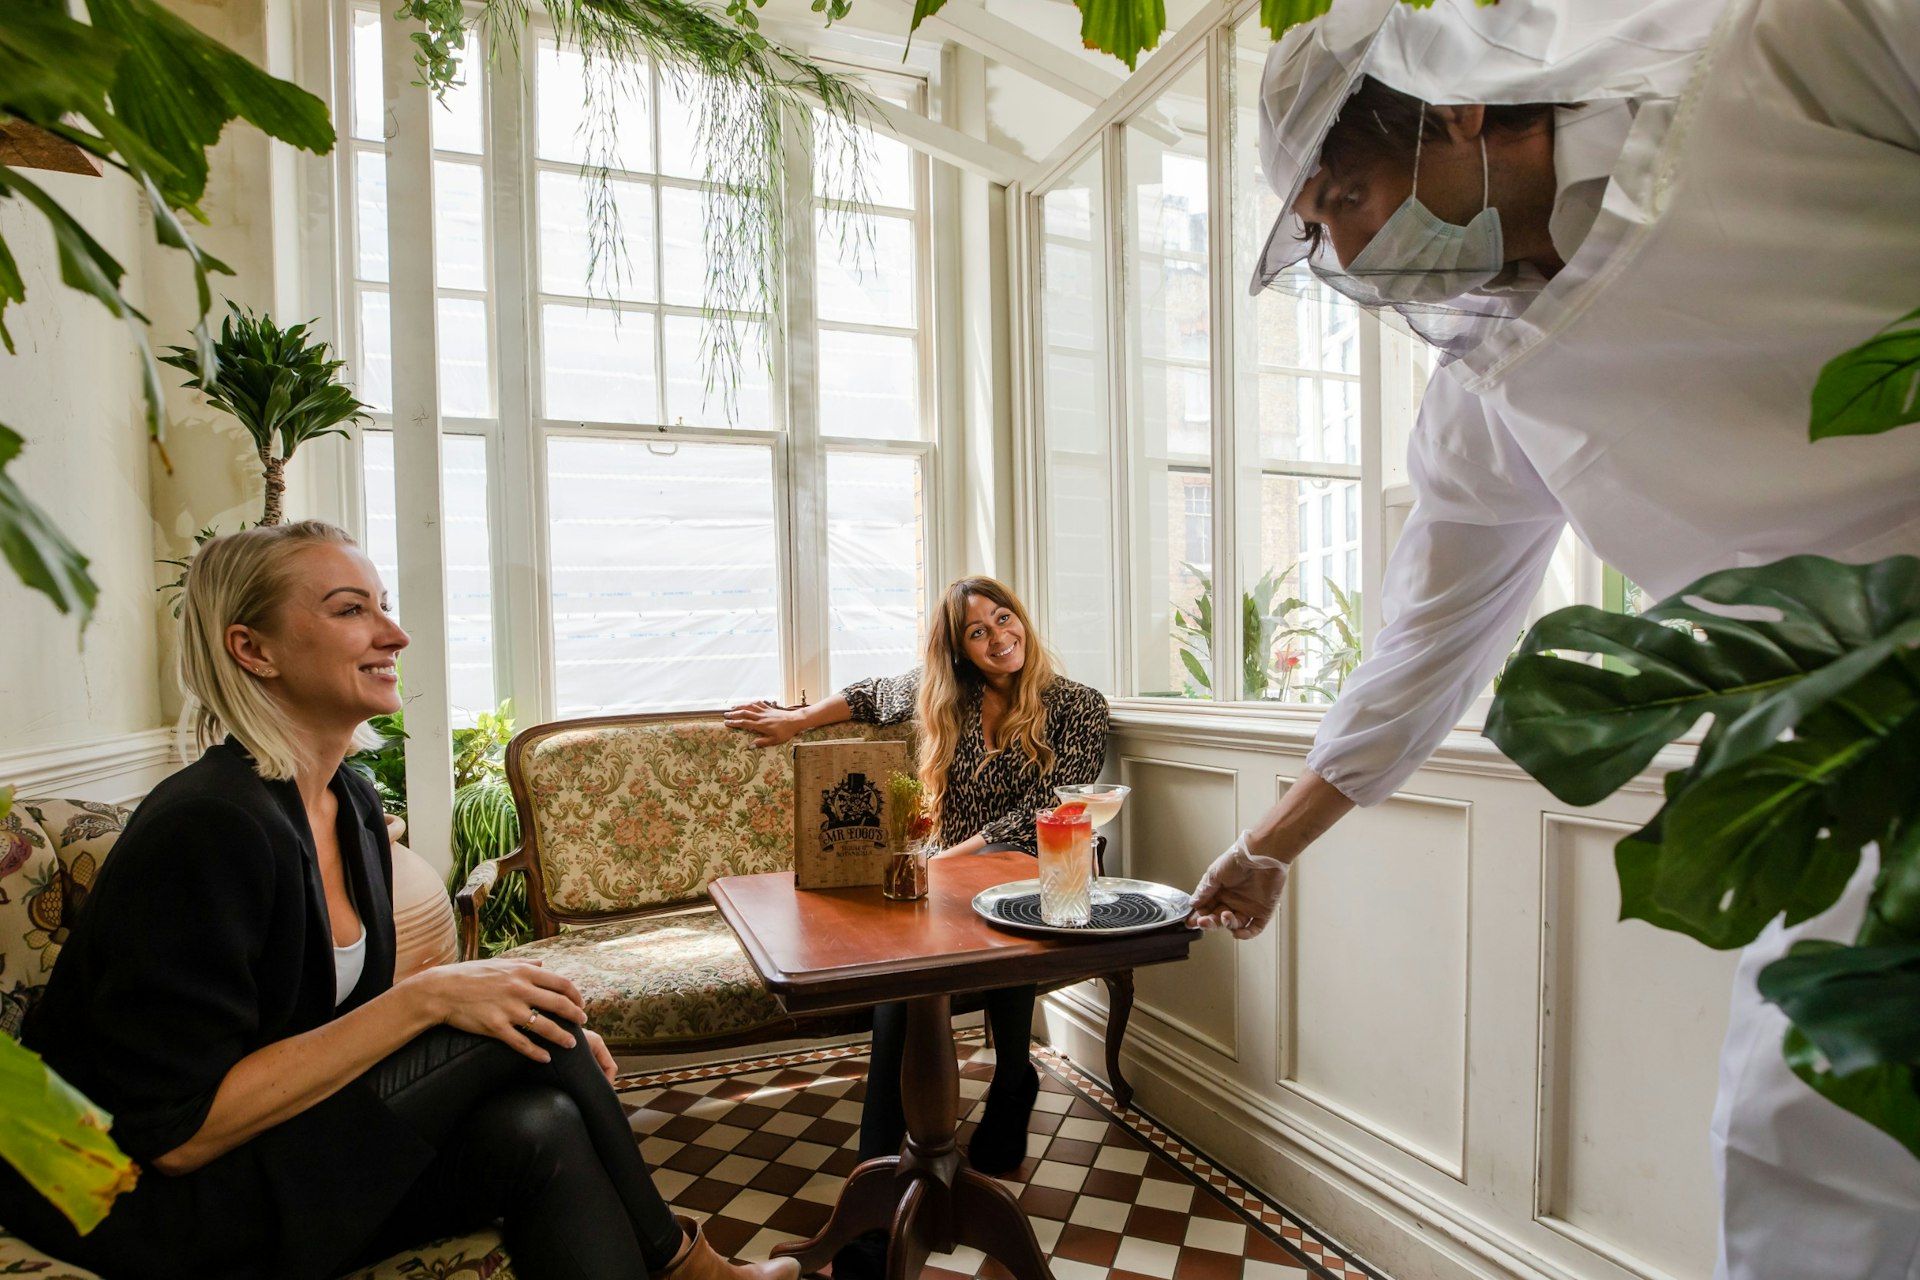 Staff serving customers wearing beekeeper suits at Mr Fogg's House of Botanicals in London